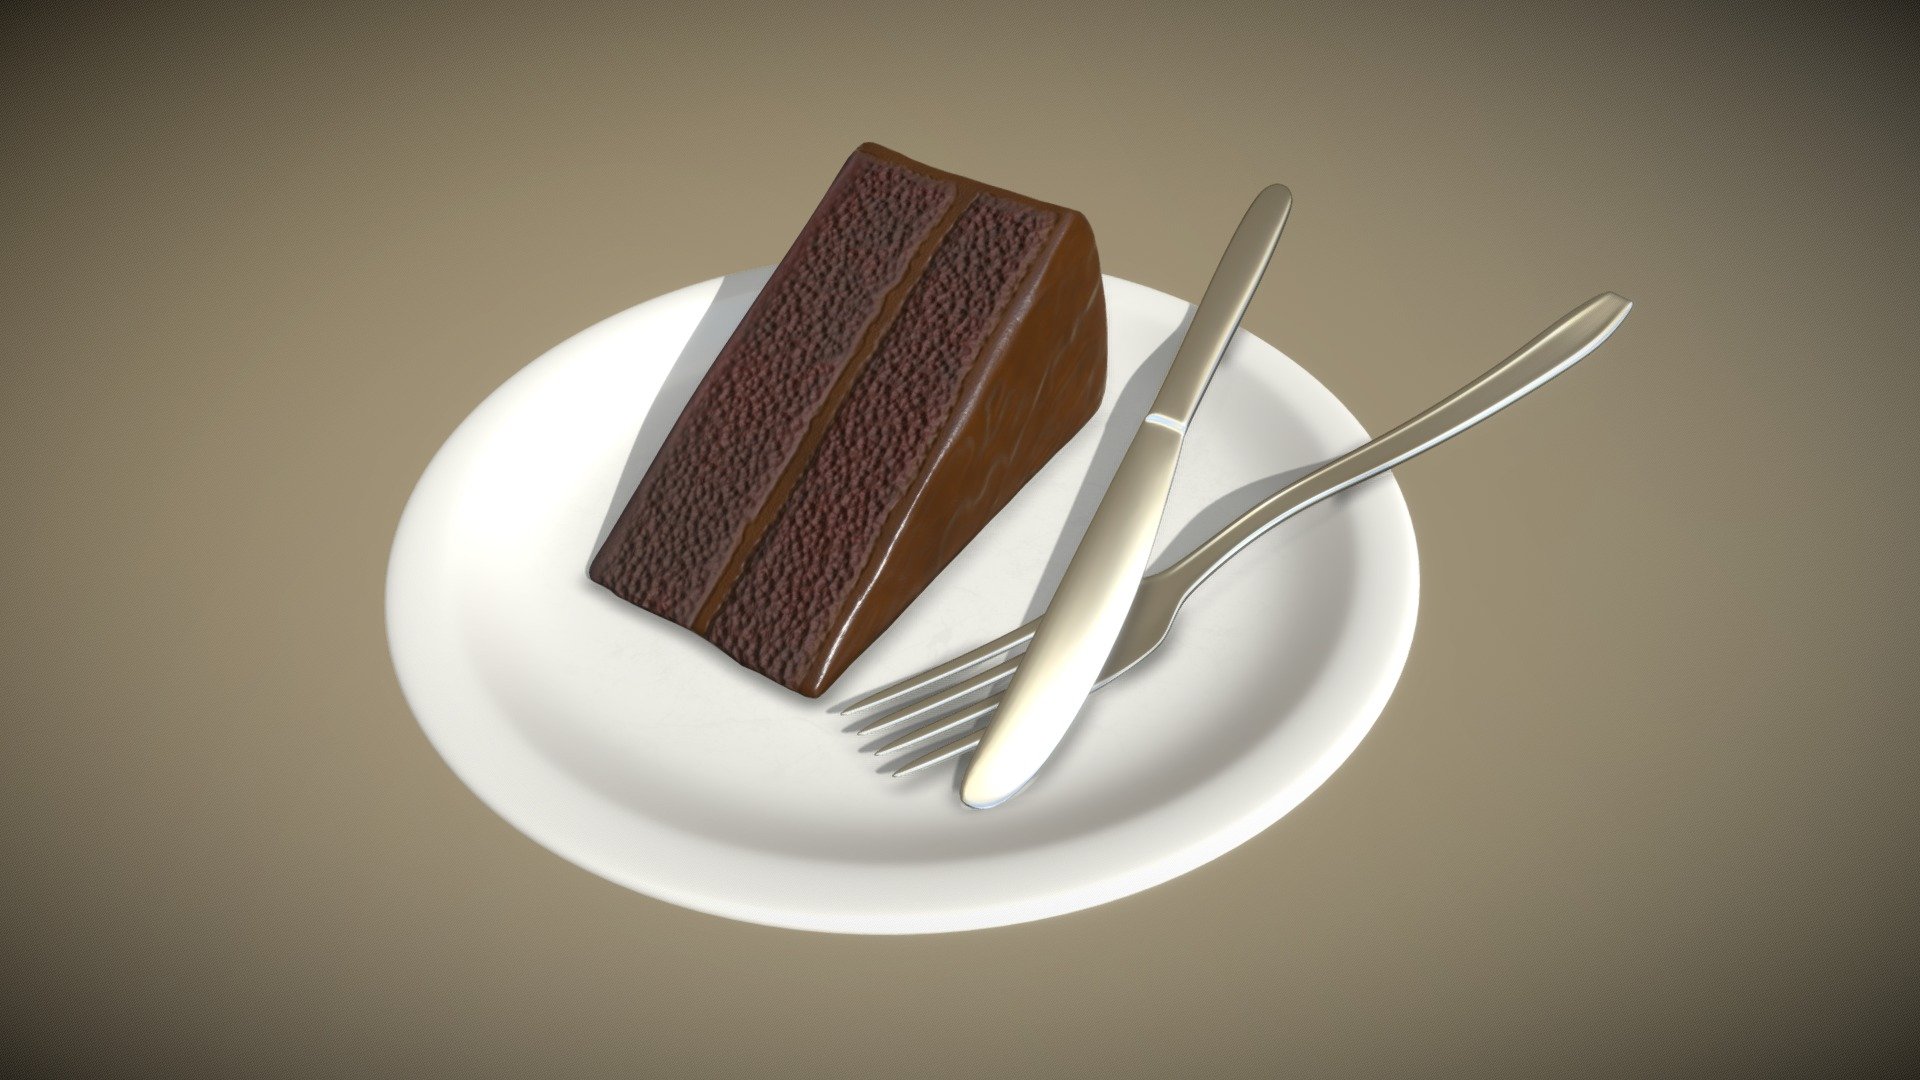 [Zip file]

Mesh Information:

*Cake mesh:




Highpoly: 1664 faces, 3328 tris

World scale (cm): 5.8 height x 10.9 x 5.76

*Plate mesh




Highpoly: 13056 faces, 26112 tris

World scale (cm): 1.48 height x 19.6 x 19.6

*Fork mesh




Highpoly: 7936 faces, 15872 tris

World scale (cm): 1.02 height x 20 x 2.02

*Knife mesh




Highpoly: 2400 faces, 4800 tris


World scale (cm): 0.29 height x 21 x 1.44




3 mesh resolution: LOW, MEDIUM, HIGH



UV unwrapped

Texture Information:




Texture size: 4096x4096

BaseColor

Roughness

Height (cake only)

Normal OpenGL and DirectX (cake only)

PNG format

Formats include: 




.obj

.fbx

.blend

Render: Blender 2.92 Cycles

HDRI from: hdrihaven.com - Cake - Dessert - Buy Royalty Free 3D model by gpz3d 3d model